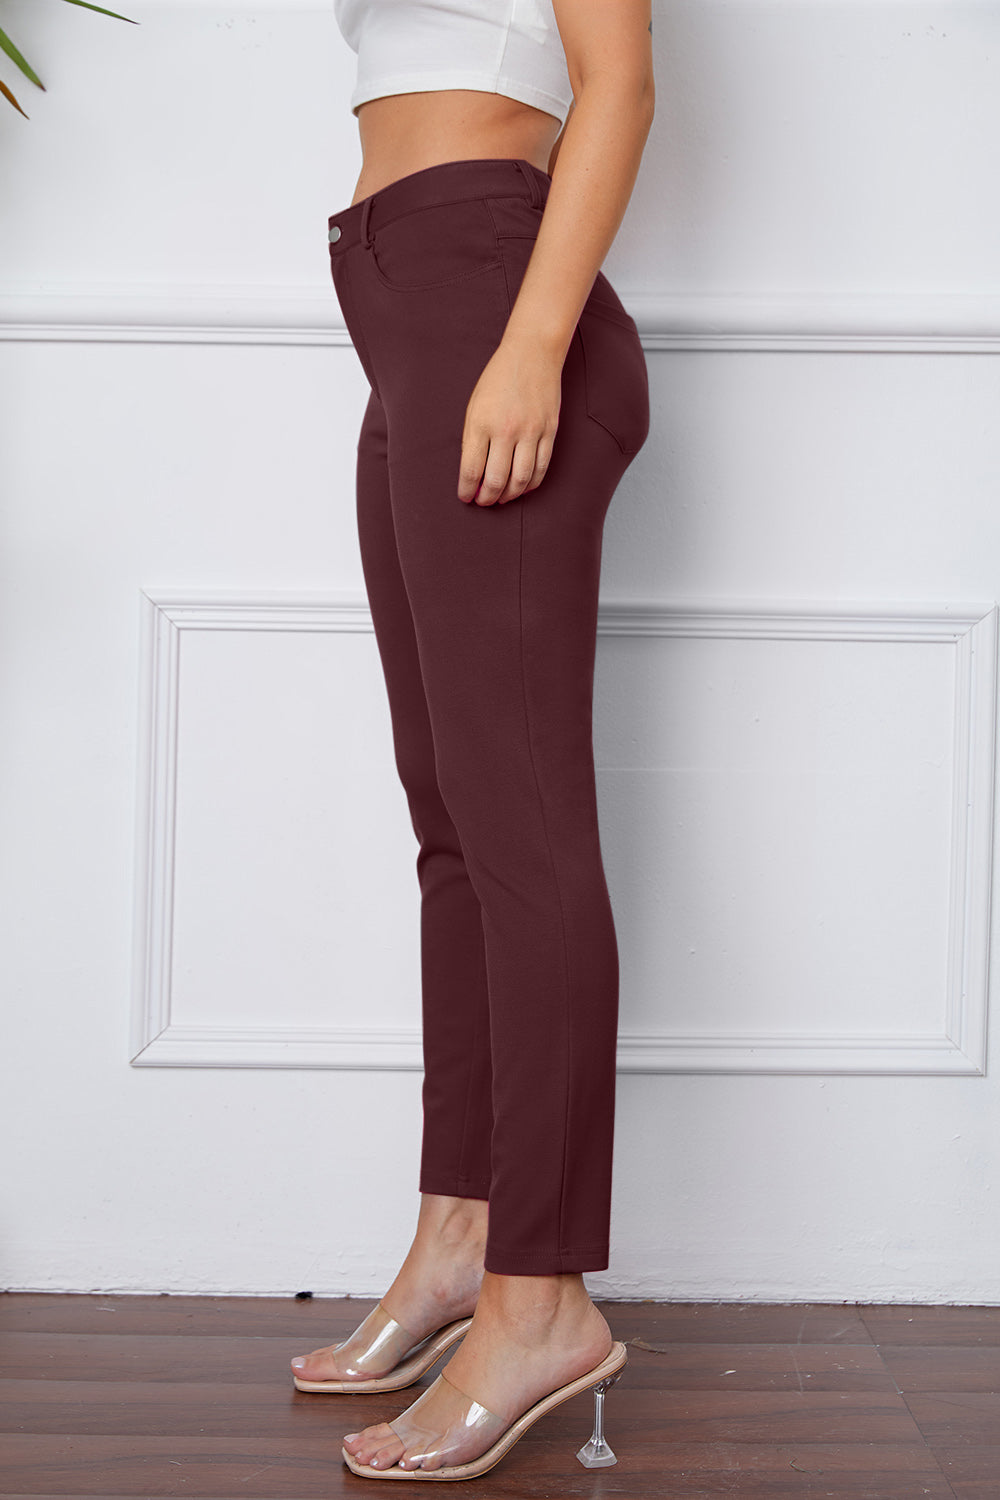 StretchyStitch Pants by Basic Bae free shipping -Oh Em Gee Boutique